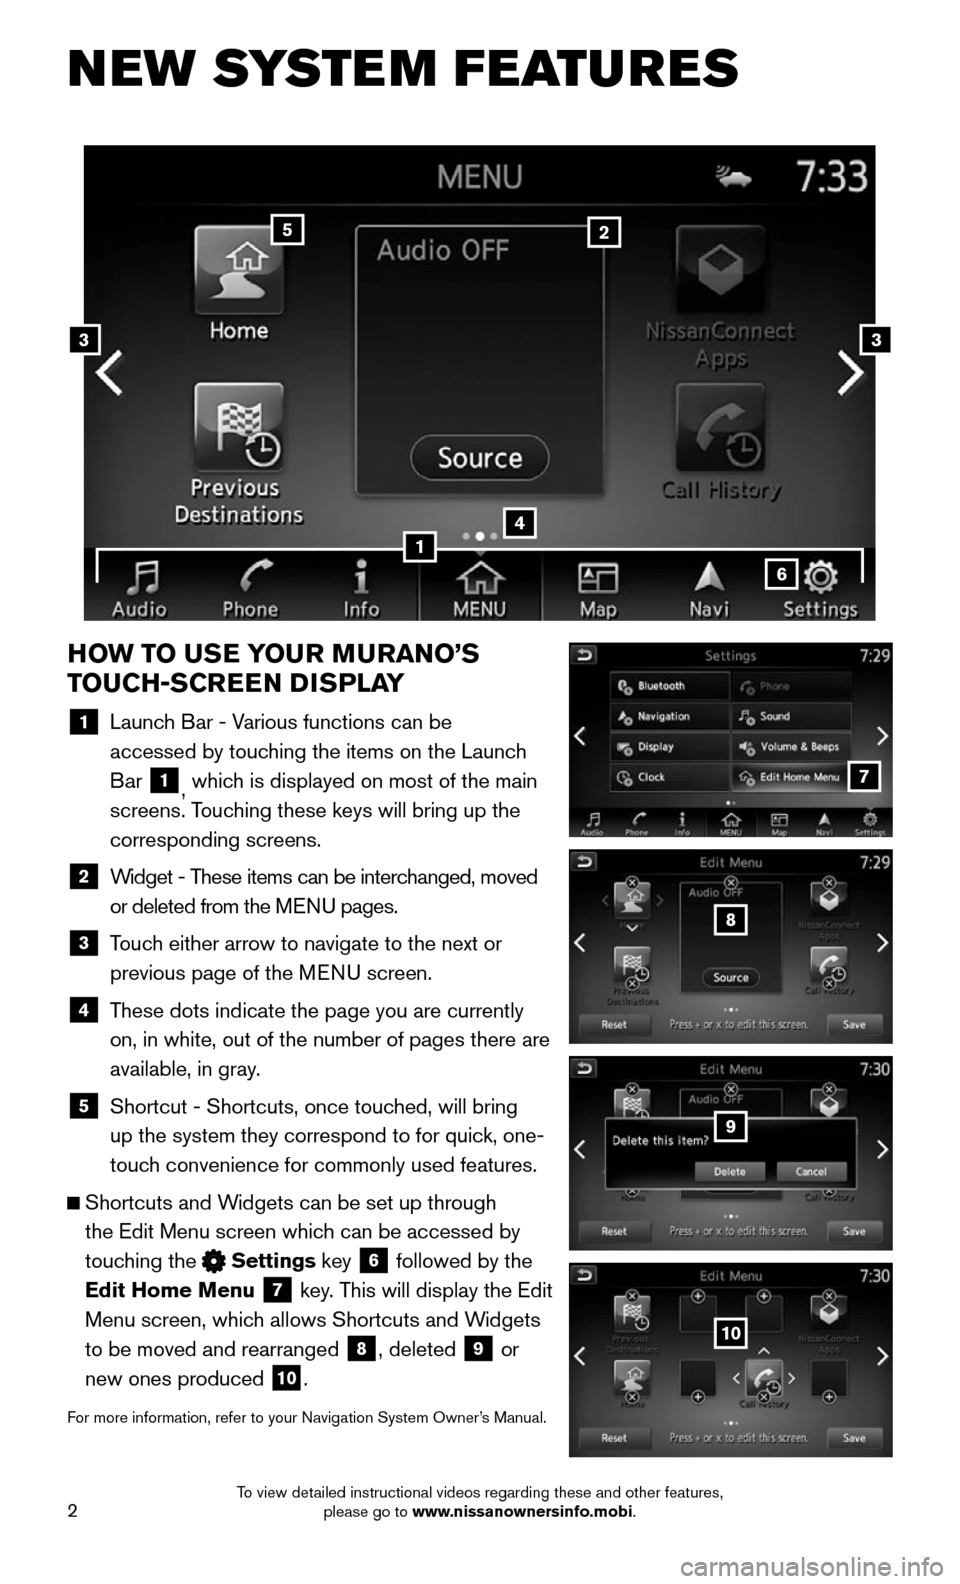 NISSAN MURANO 2015 3.G Quick Reference Guide 2
NEW SYSTEM FEATURES
HOW TO USE YOUR MURANO’S 
TOUCH-SCREEN DISPLAY
1    Launch Bar - Various functions can be  
accessed by touching the items on the Launch 
Bar 1, which is displayed on most of t